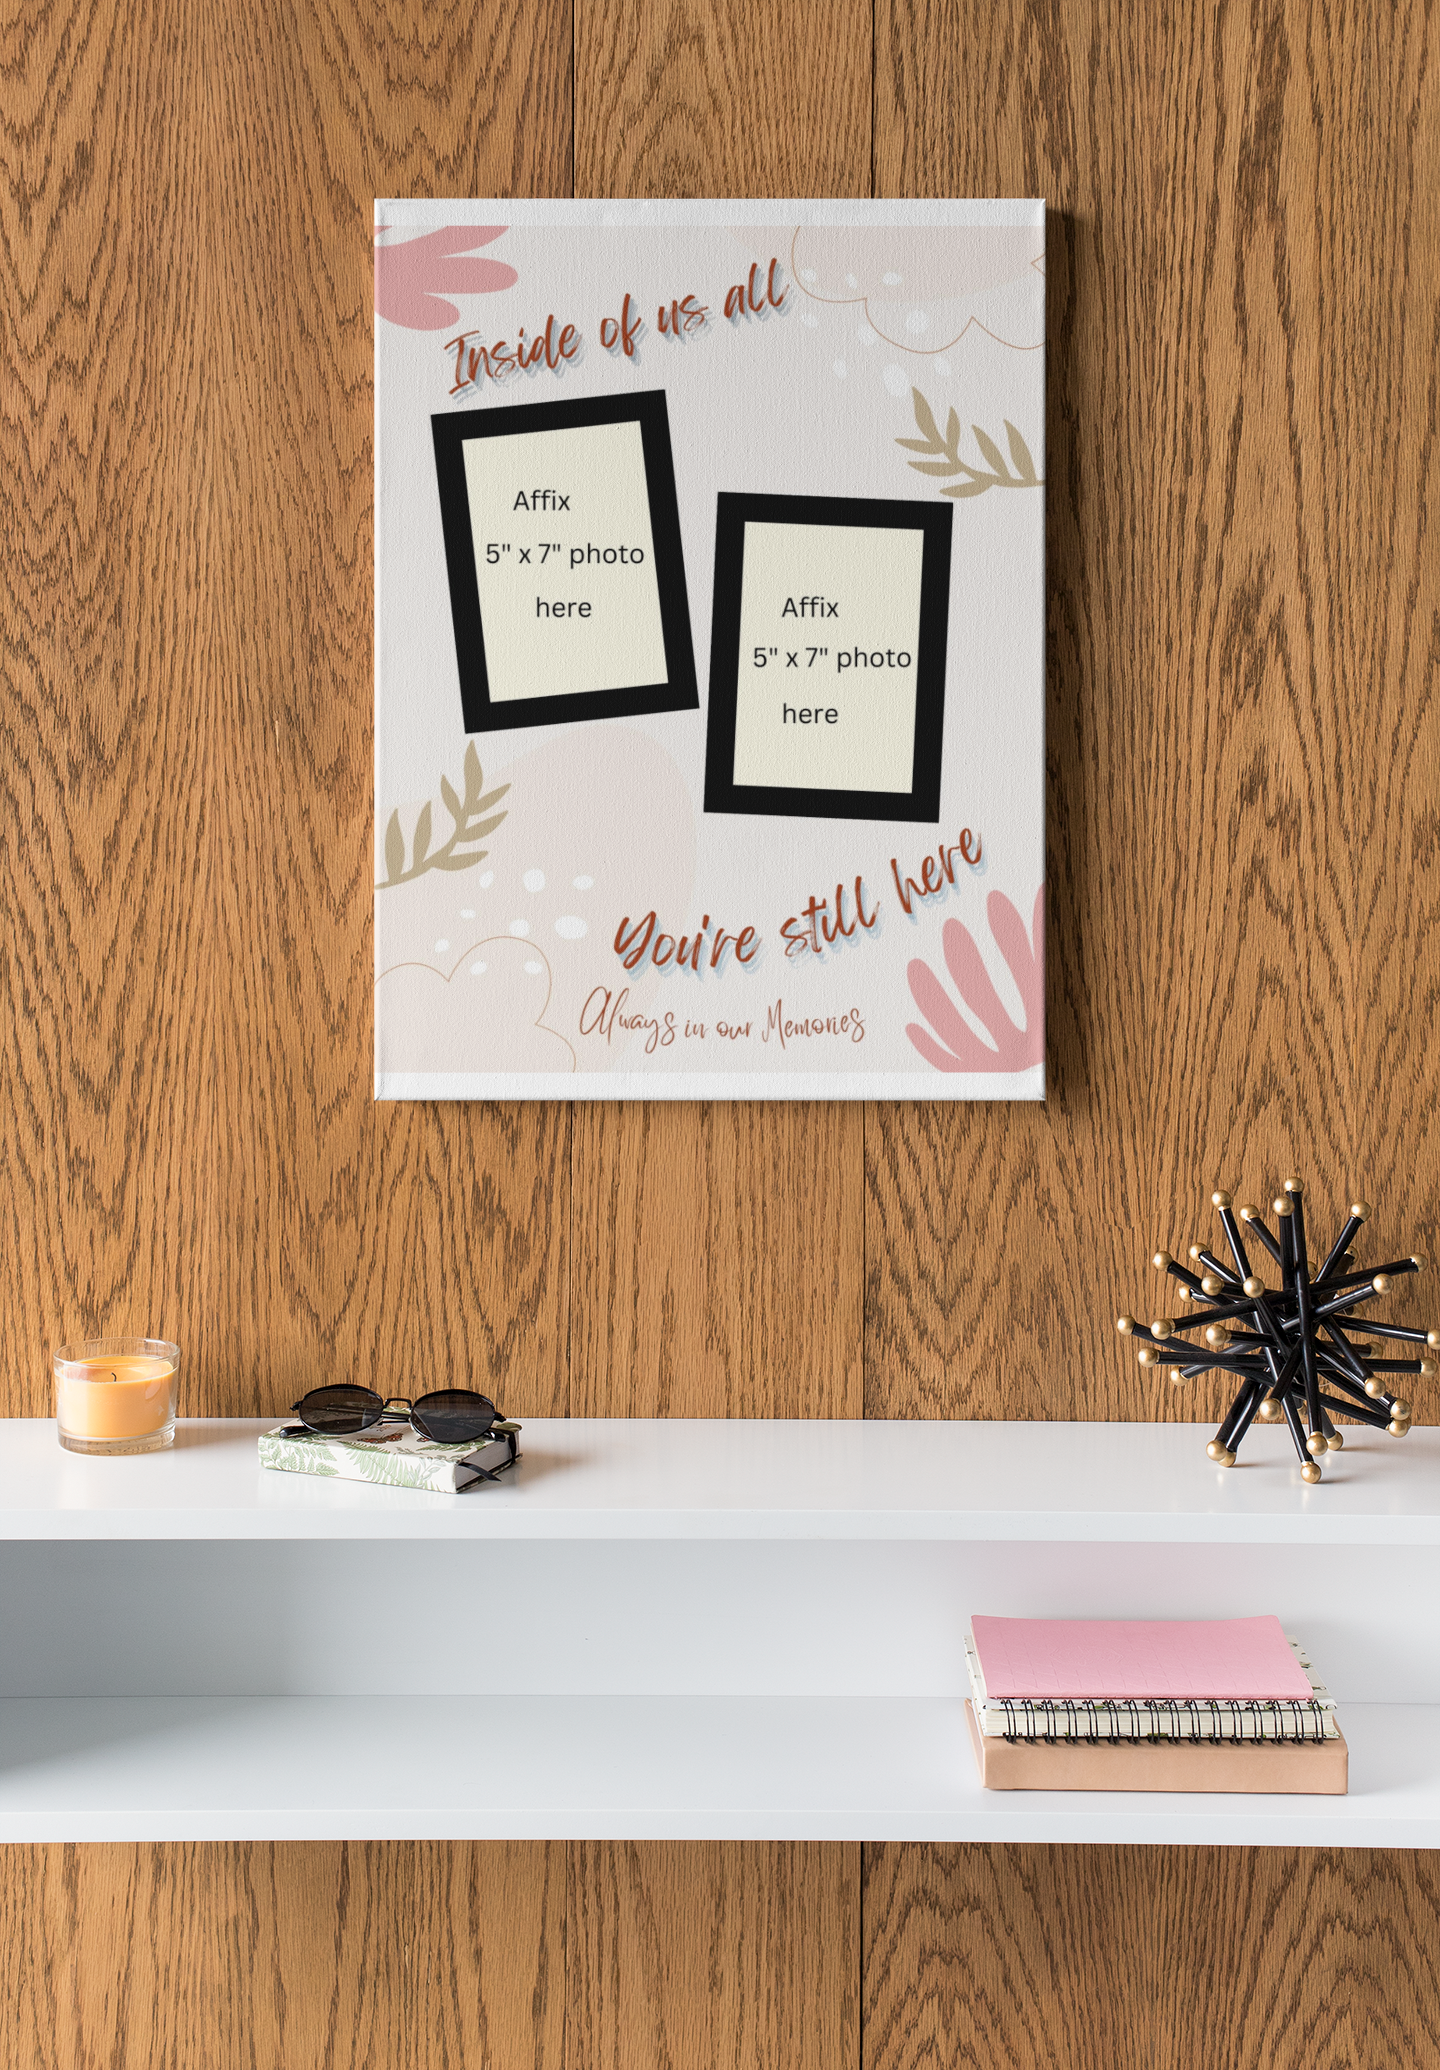 MEMORY of a LOVED ONE - QUIRKY UNIQUE WALL ART with a LEAFY theme, featuring heartfelt words of love to remember them always.